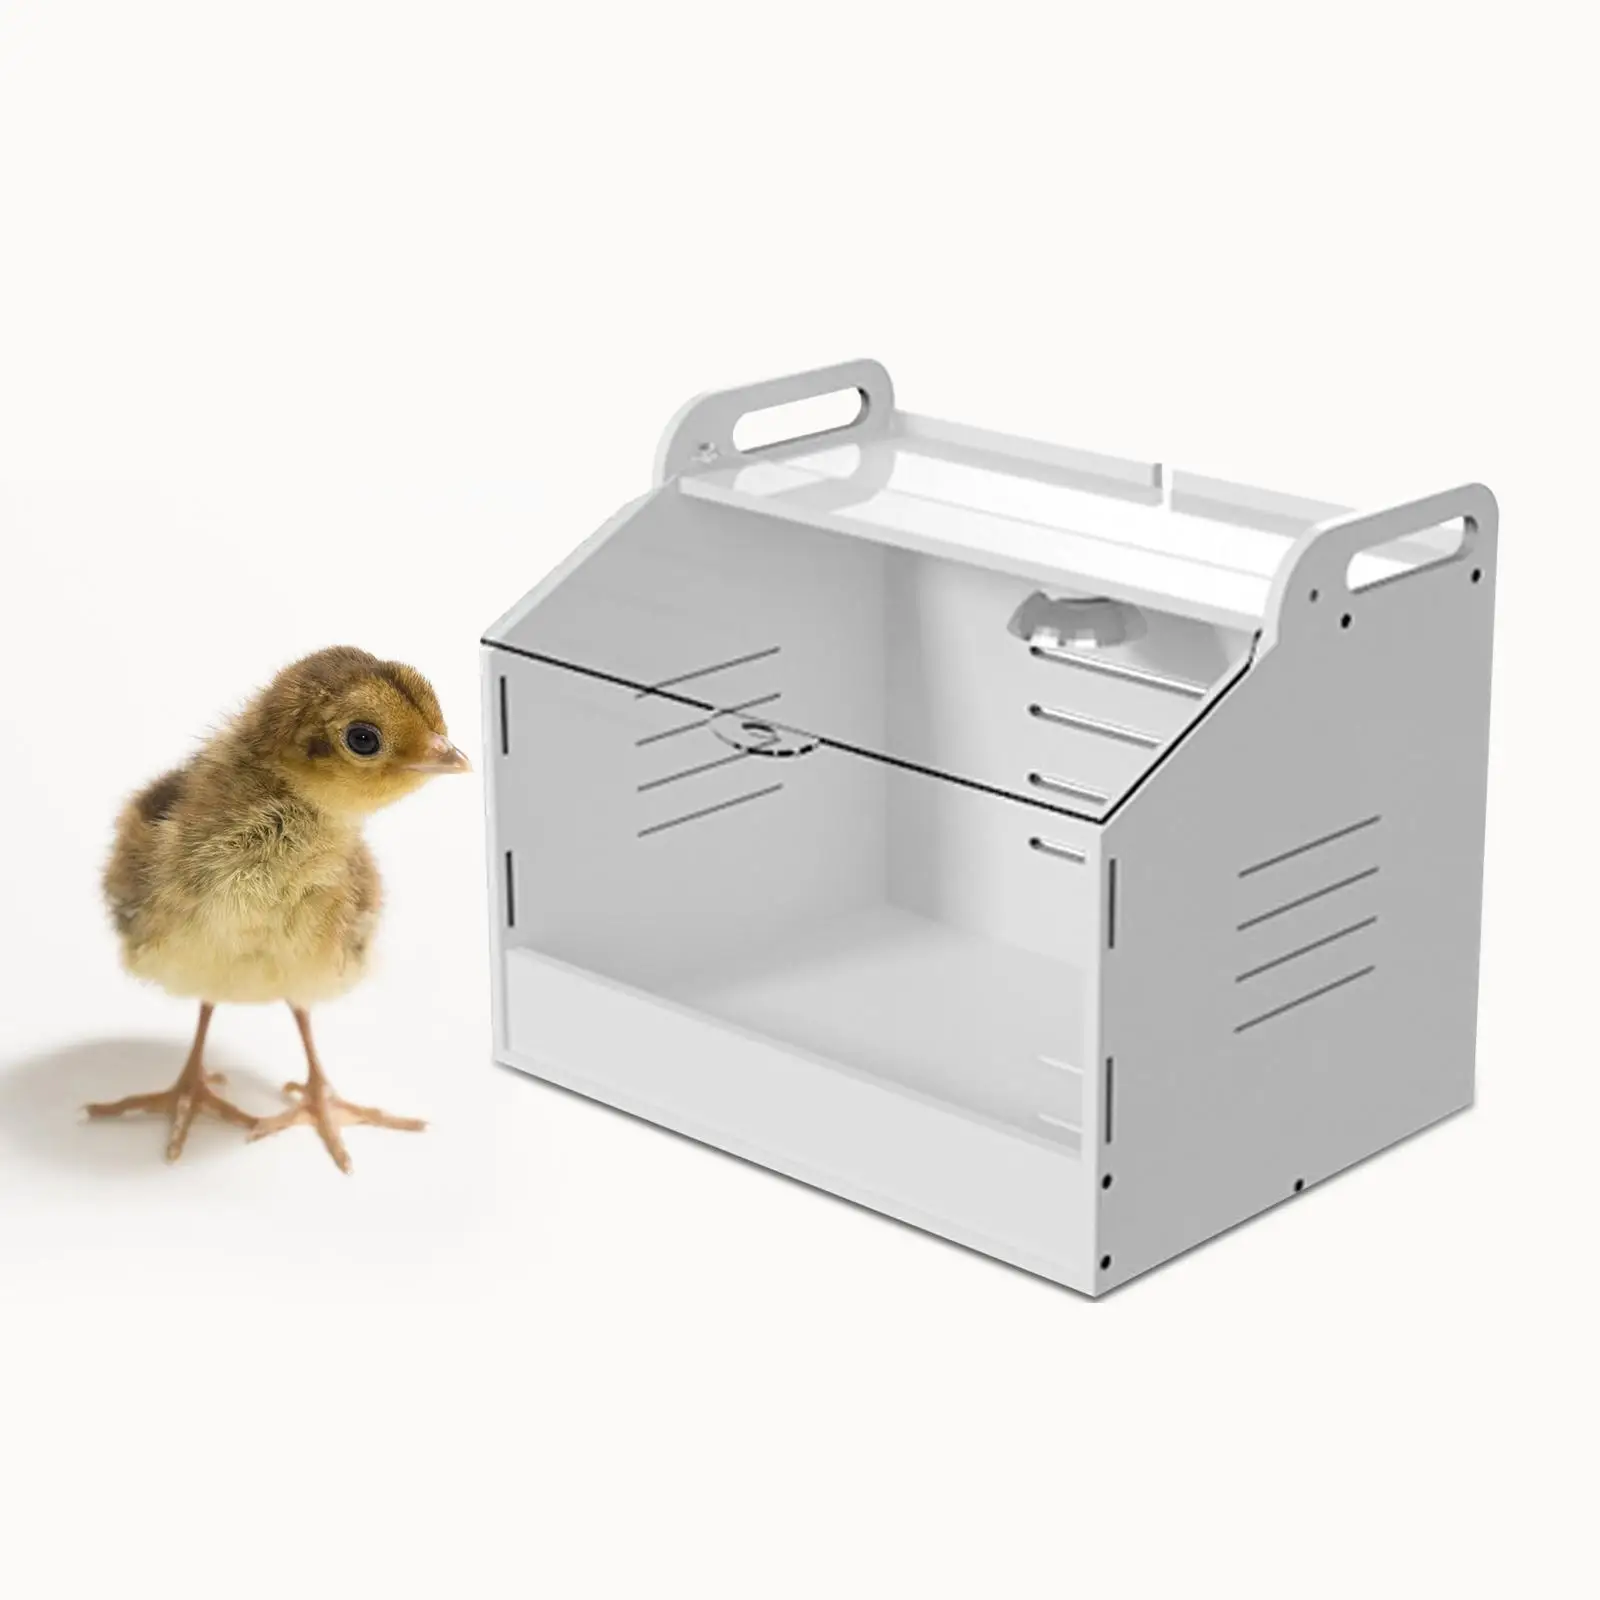 Automatic Poultry Hatcher Machine Hatching Poultry Incubation Box Egg Incubator Farm Equipment for Parakeet Turkey Quail Chicken